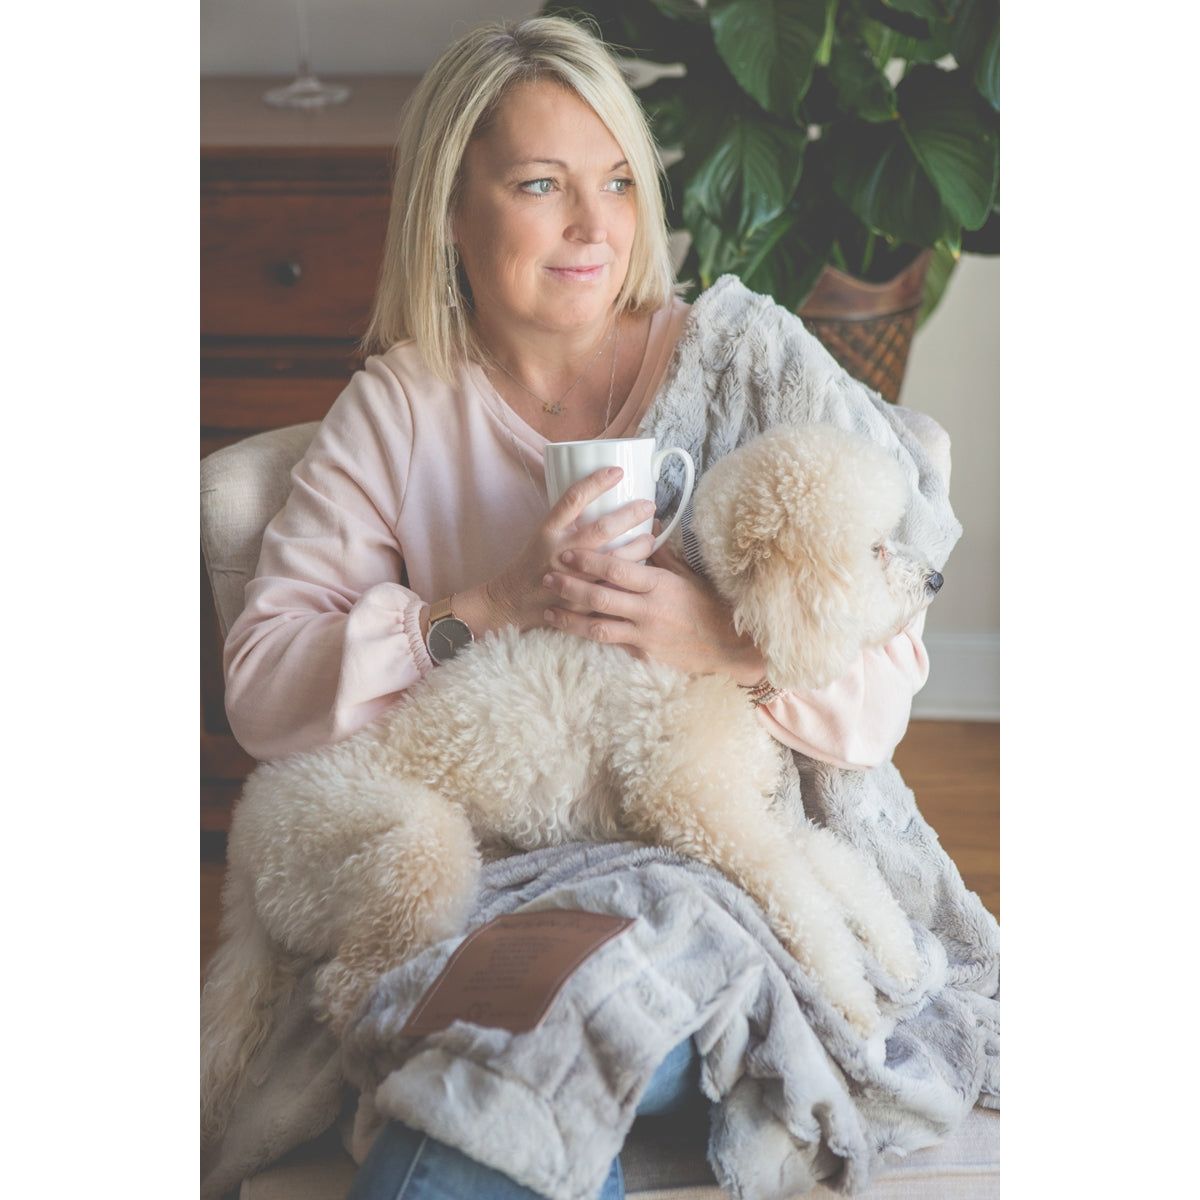 A woman snuggled in the sympathy blanket with her dog.